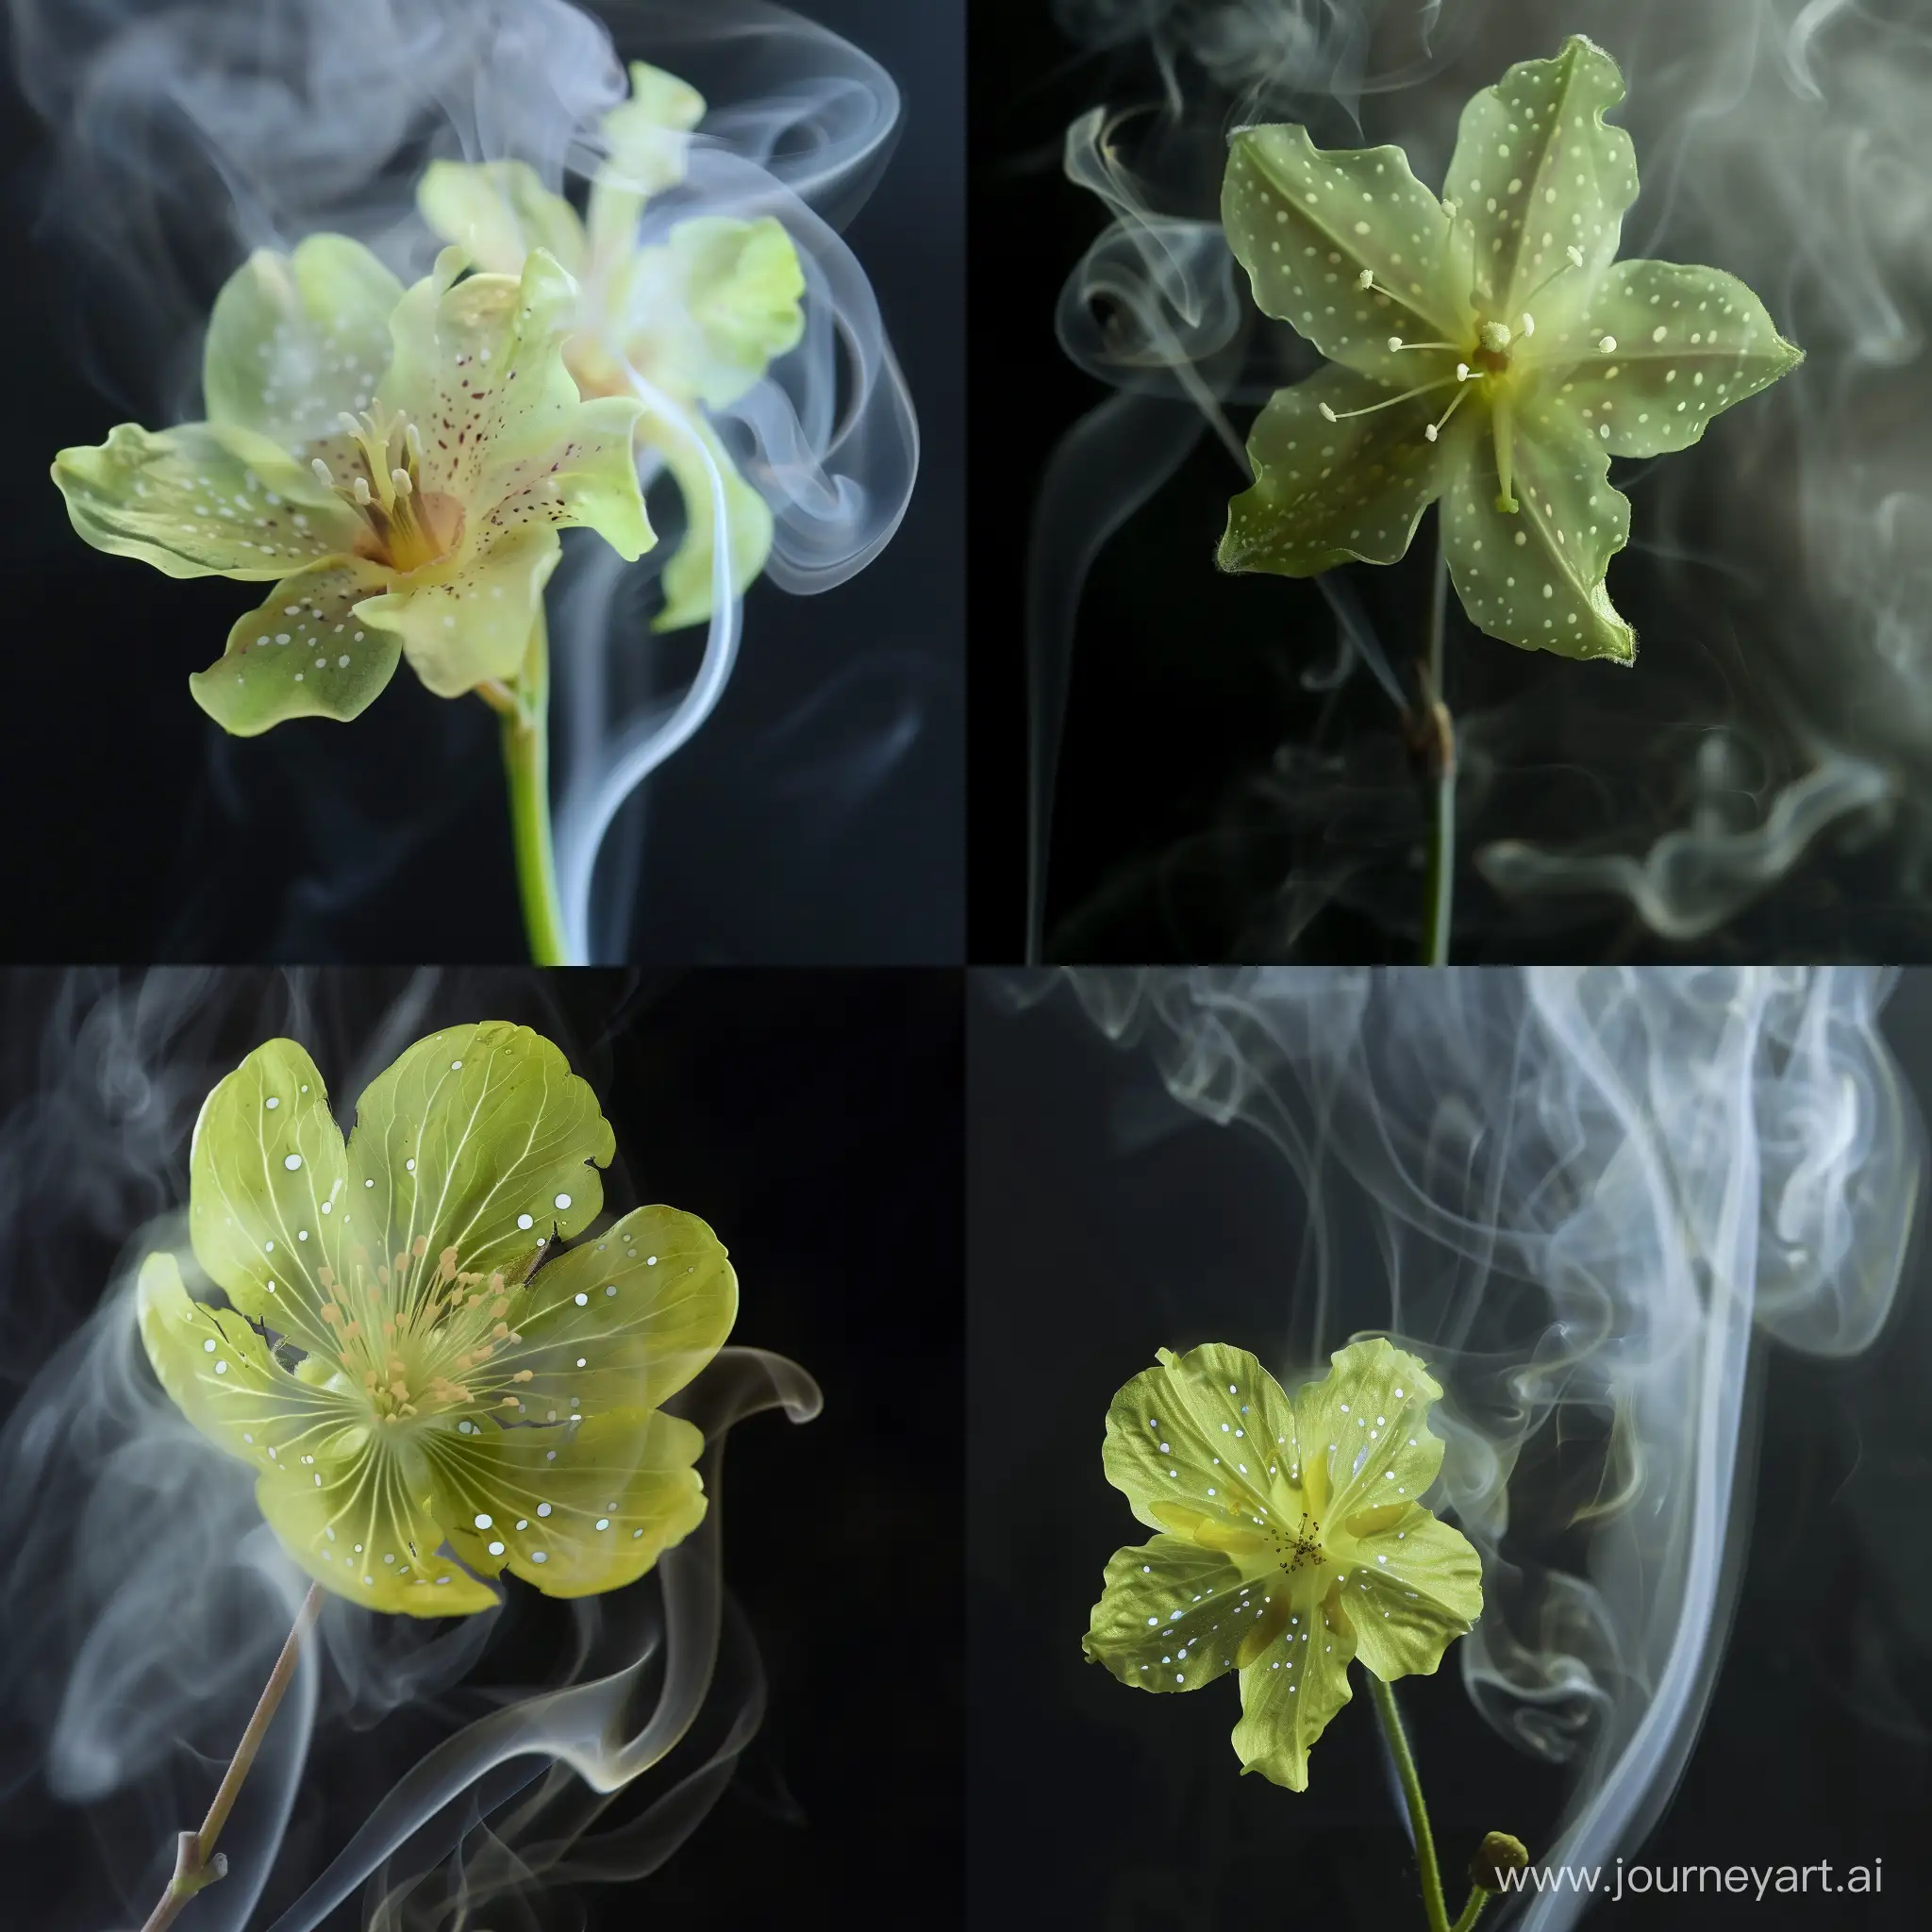 Lime-Flower-with-White-Spots-in-Smoke-Vibrant-Botanical-Still-Life